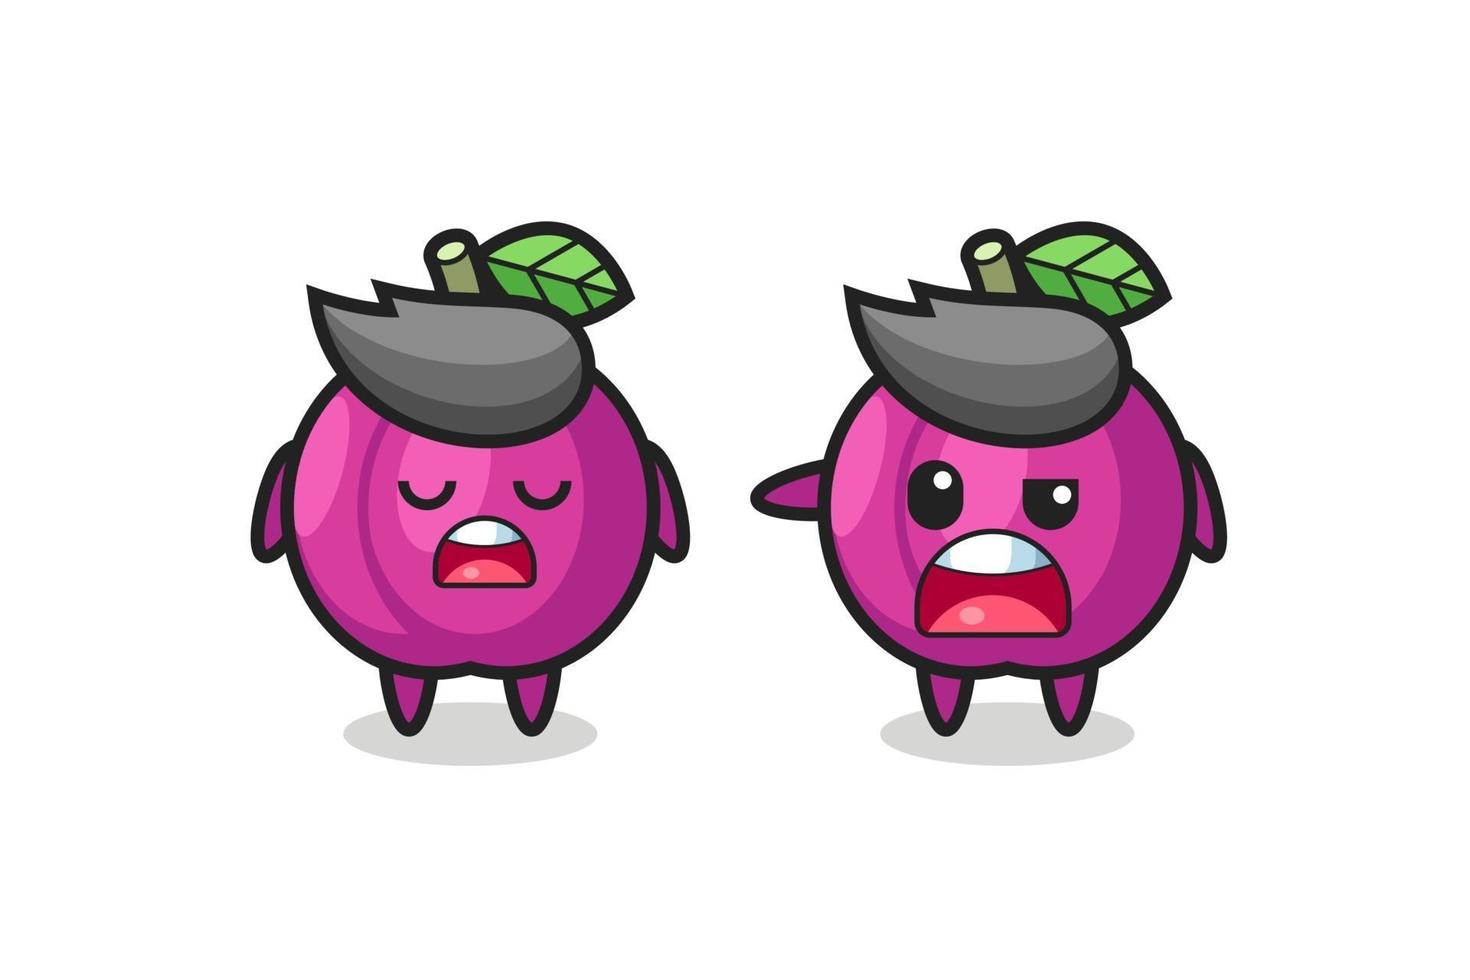 illustration of the argument between two cute plum fruit characters vector